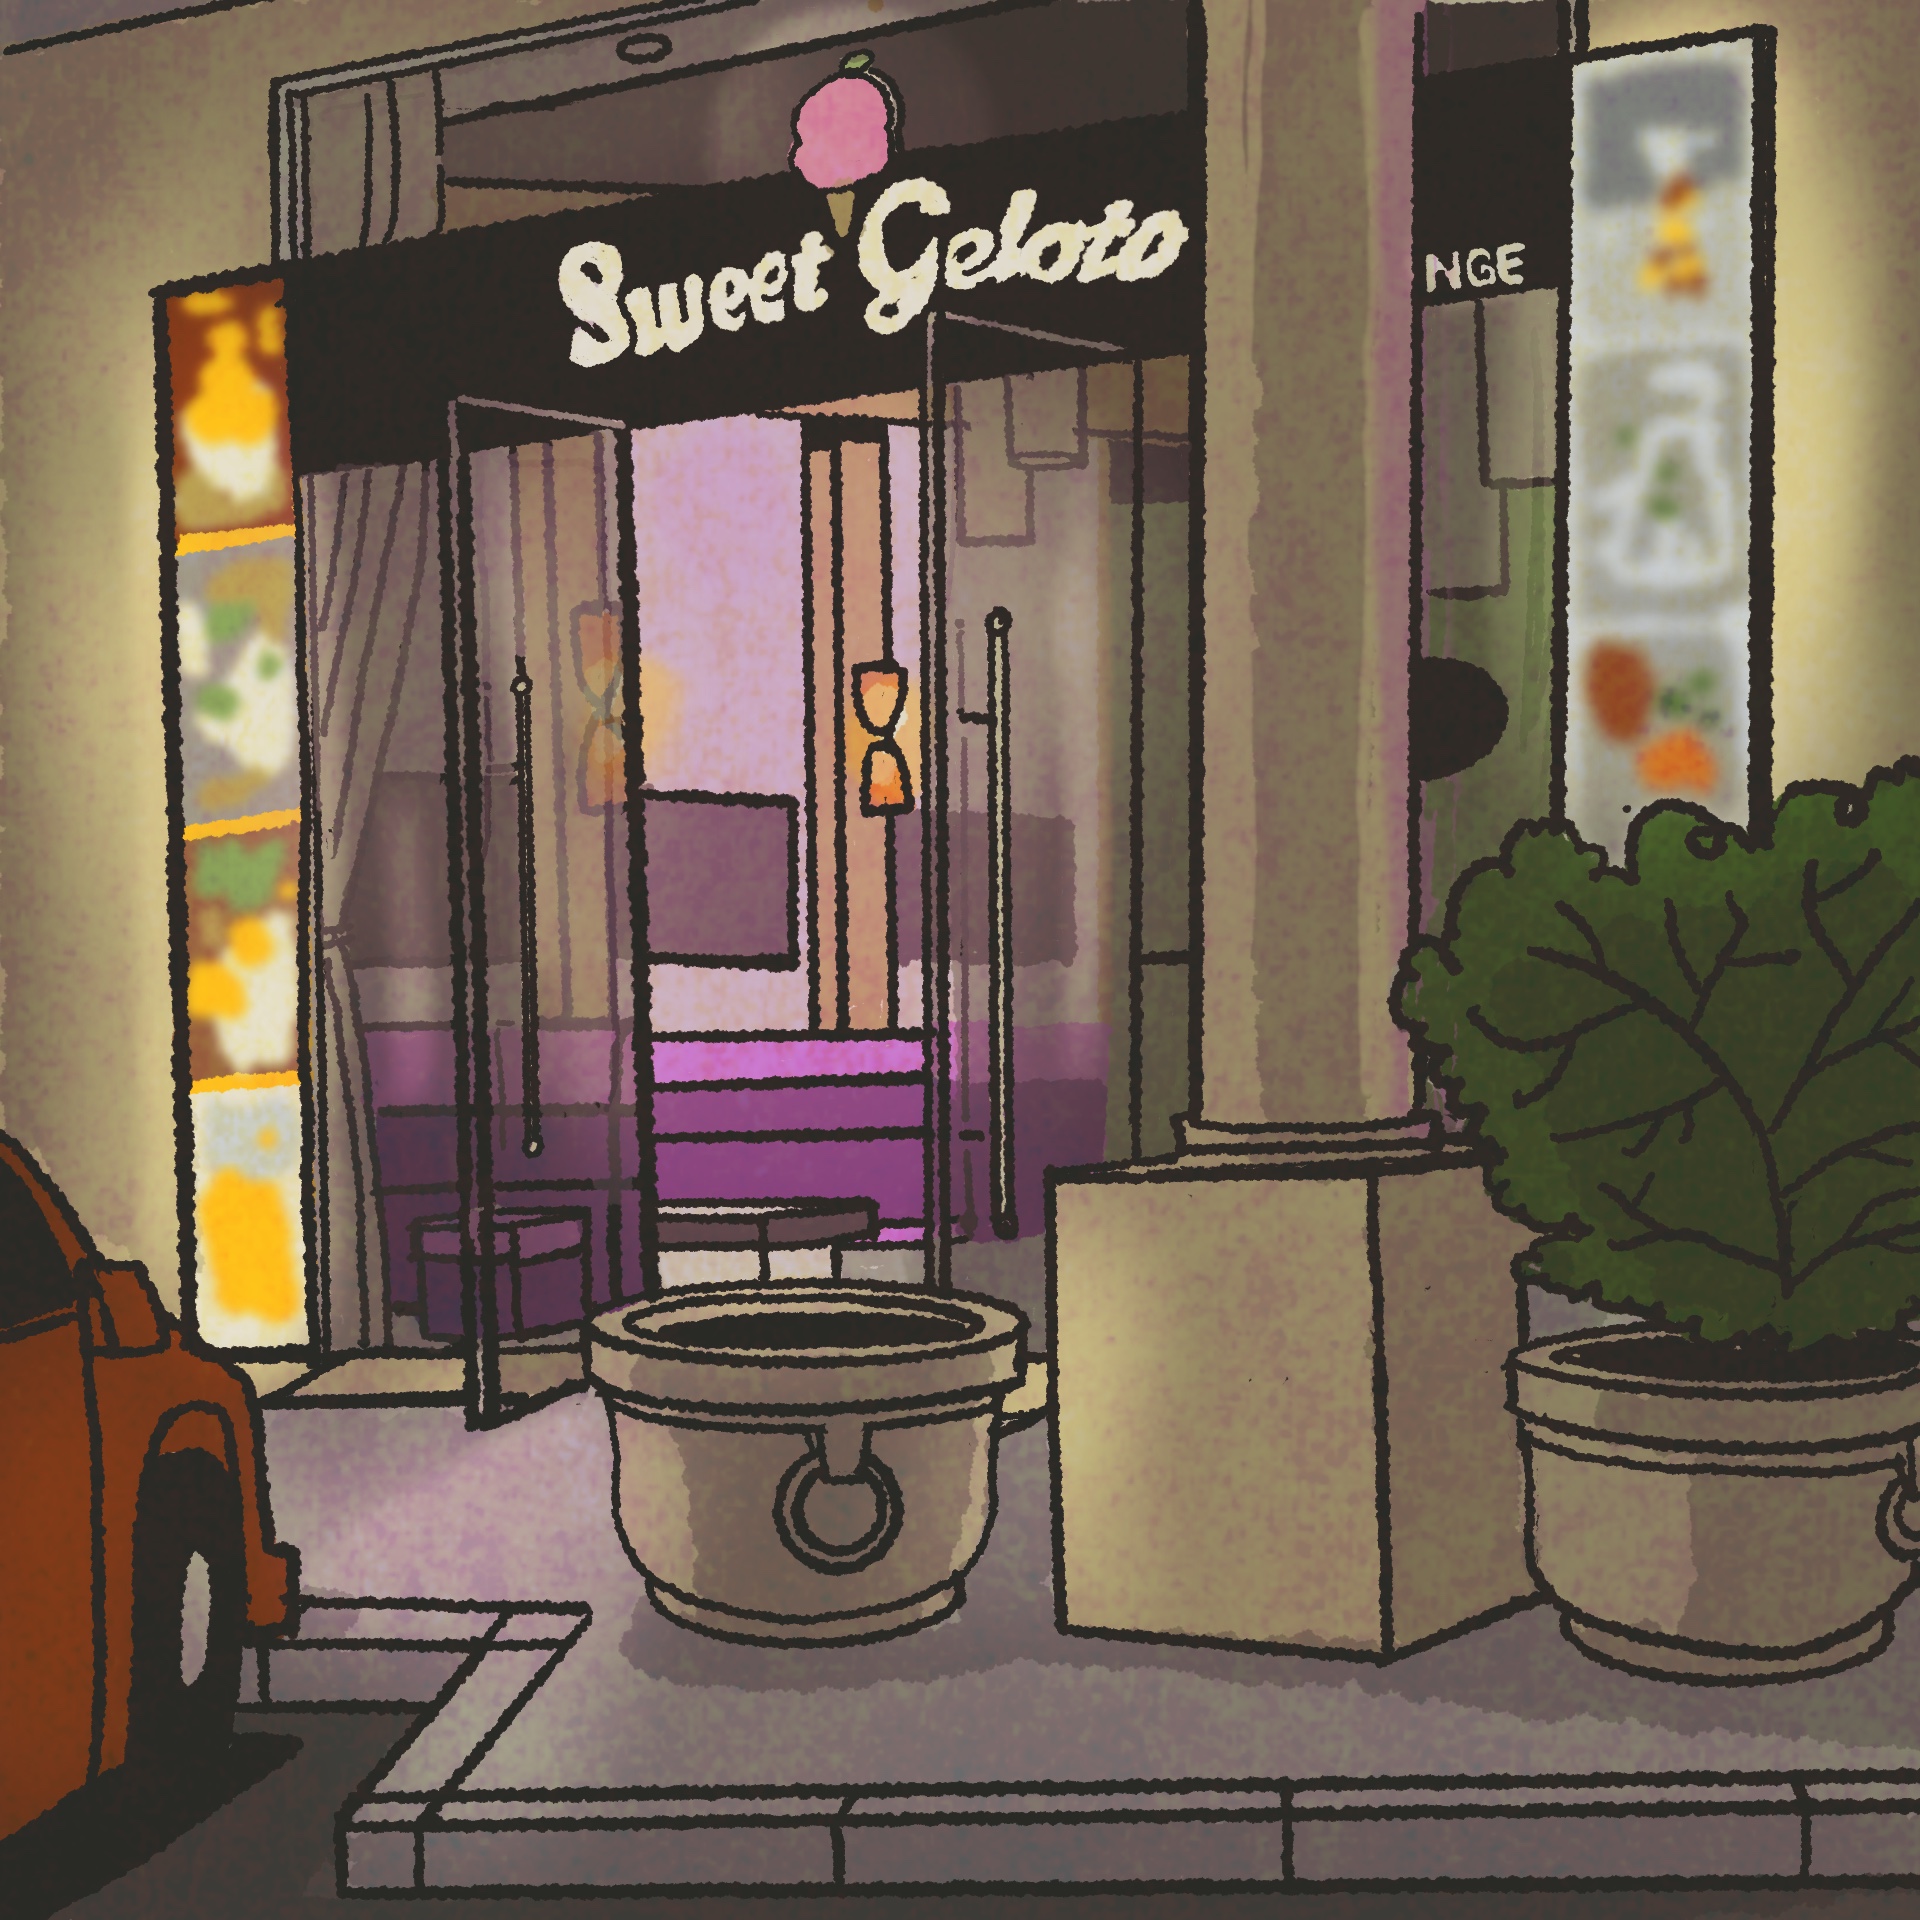 Illustration: The brightly lit exterior of a boba shop called Sweet Gelato.